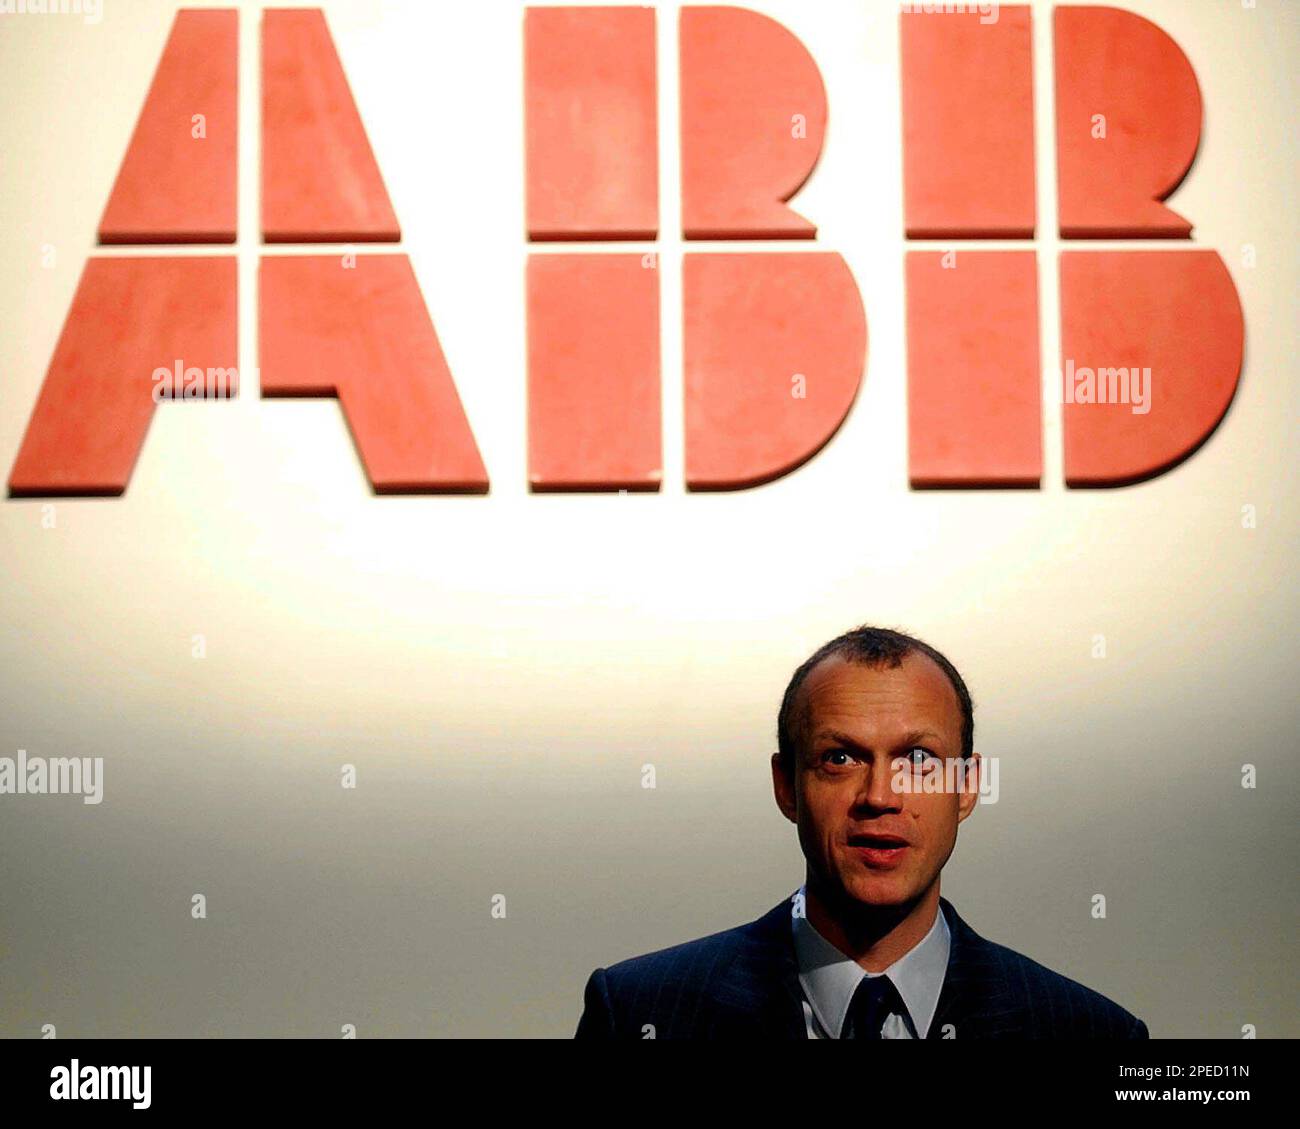 Fred Kindle, CEO of ABB, talks to the media at the presentation of the 2004 fourth quarter and full year results in Baden, Switzerland, on Thursday, Feb. 17, 2005. The international engineering concern ABB which is based in Zurich, Switzerland, on Thursday reported a net profit of US$201 millions, after making a loss of US$779 millions in 2003. ABB moved into the black figures in 2004 after three years of losses.(AP Photo/Keystone, Walter Bieri) Stock Photo